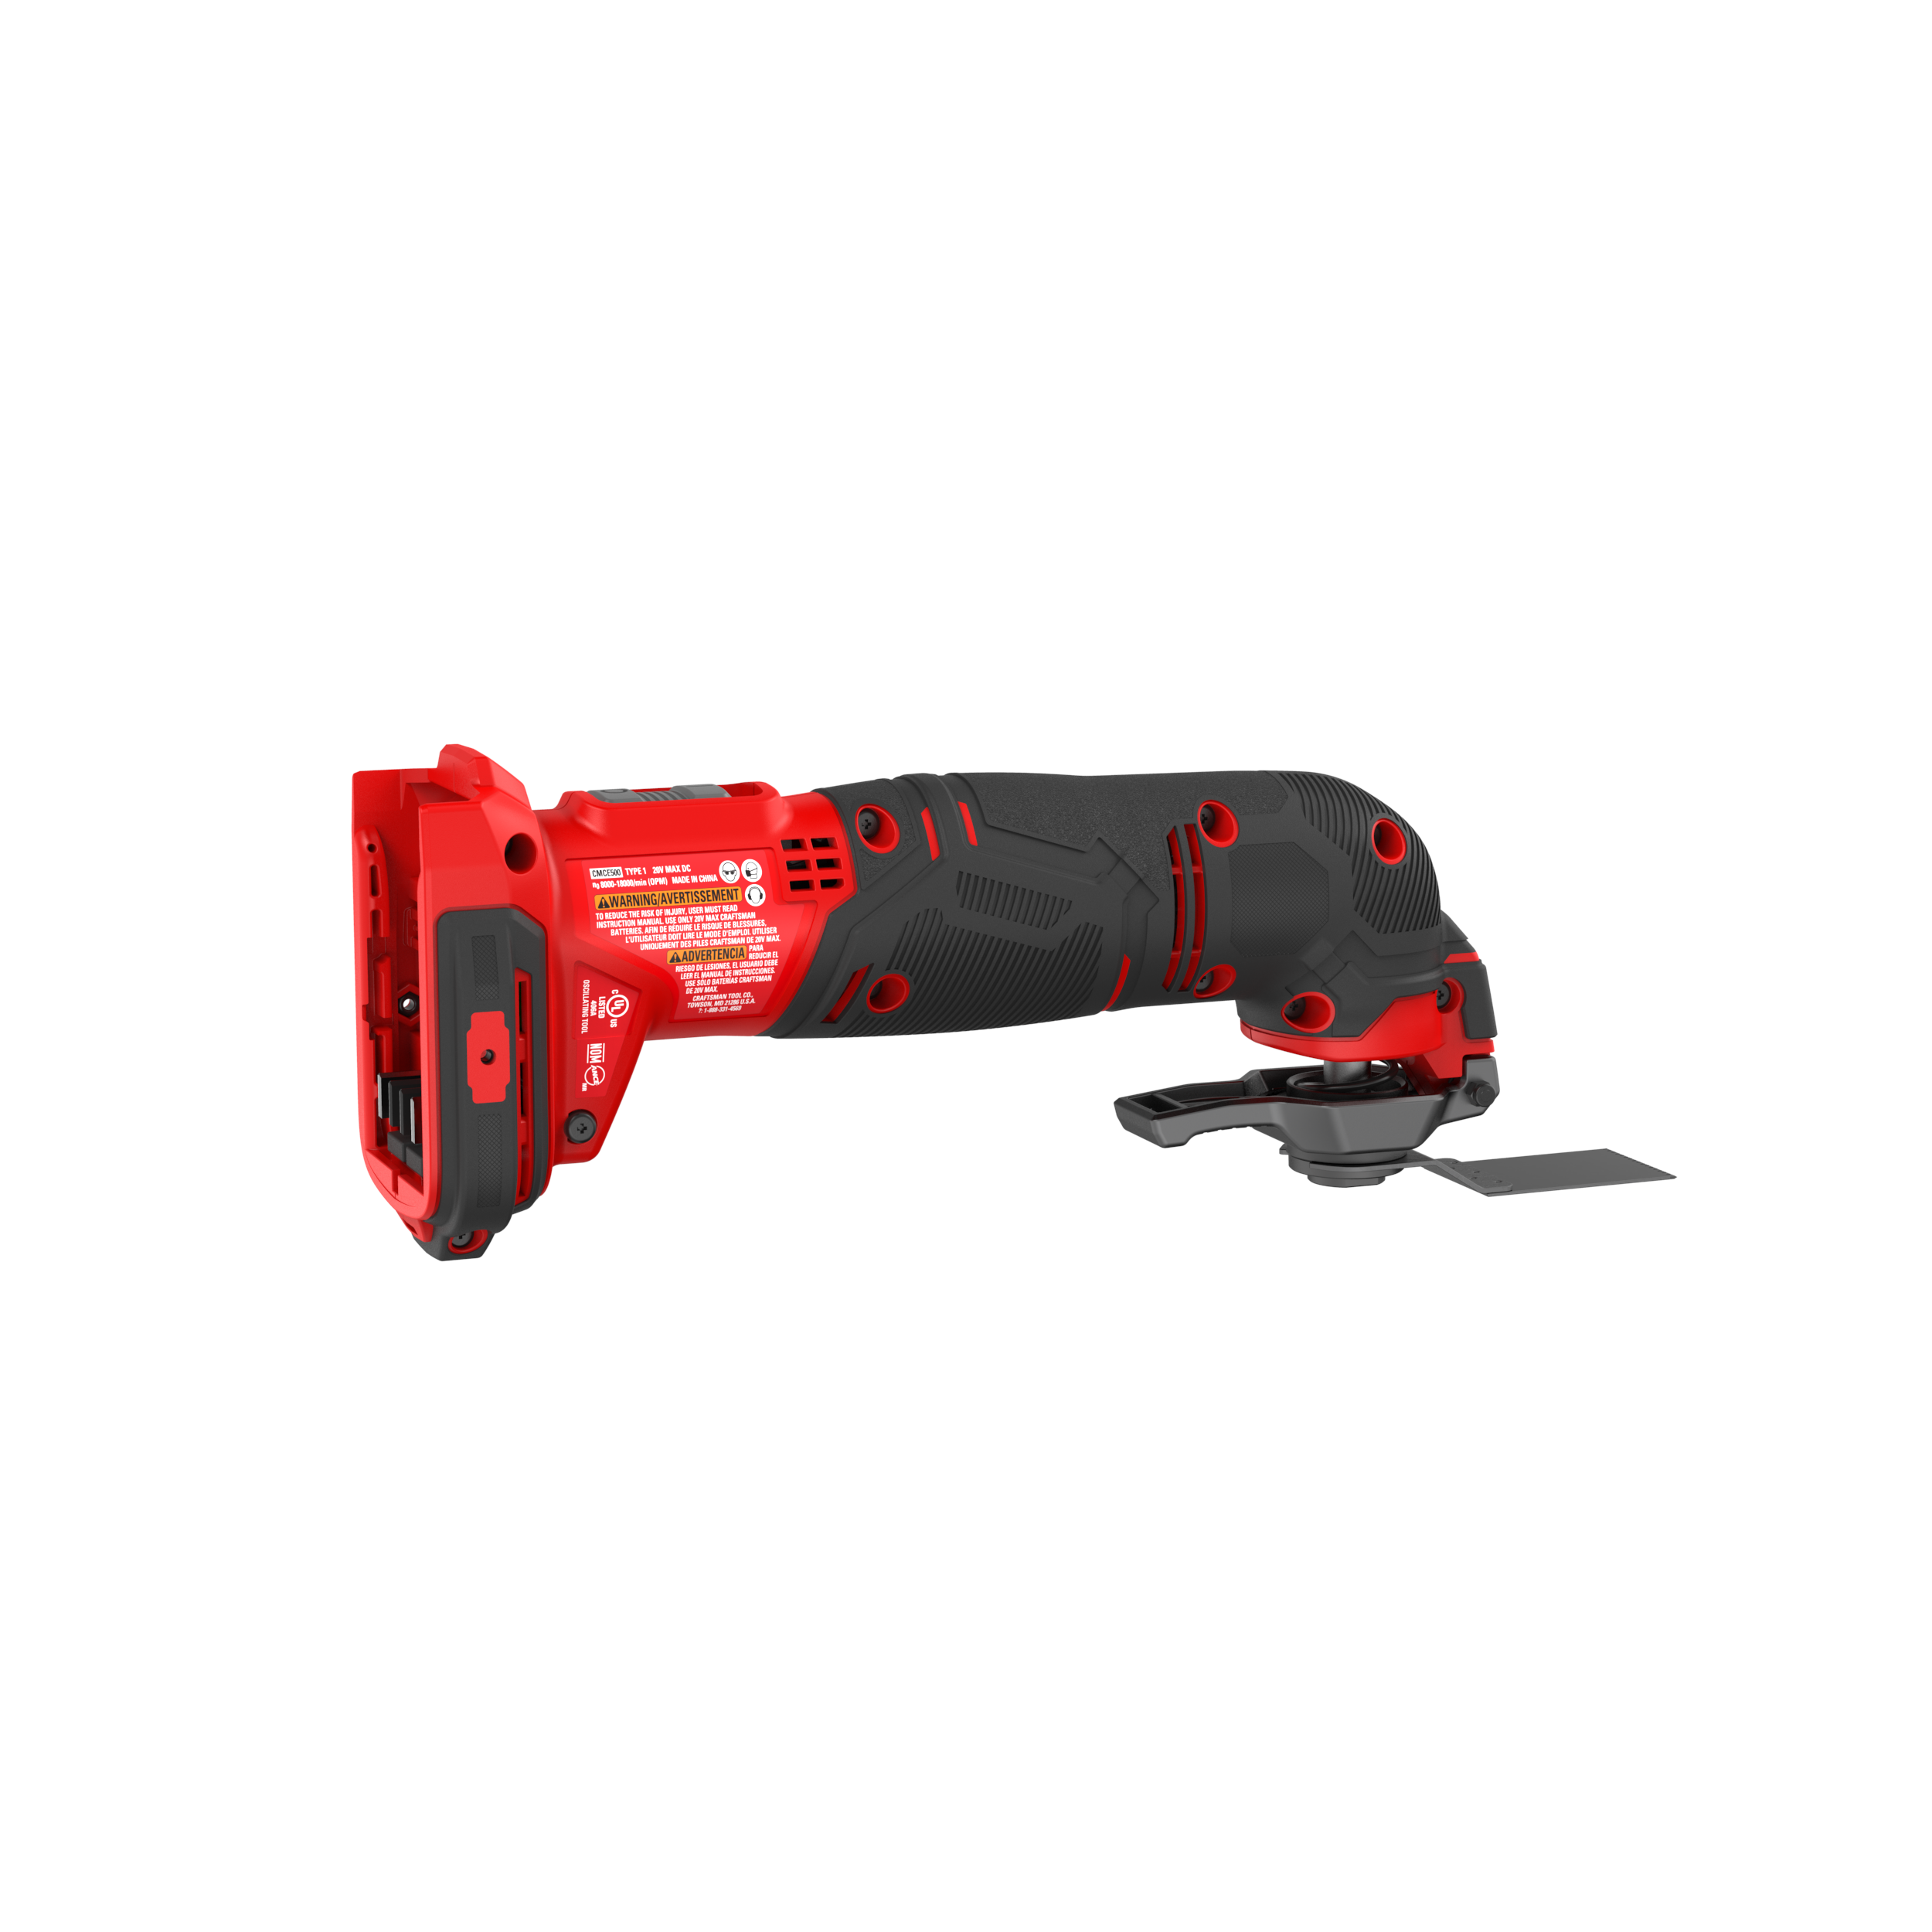 WORKSITE 20V Cordless Oscillating Multi Tool 18000OPM Saw Blades